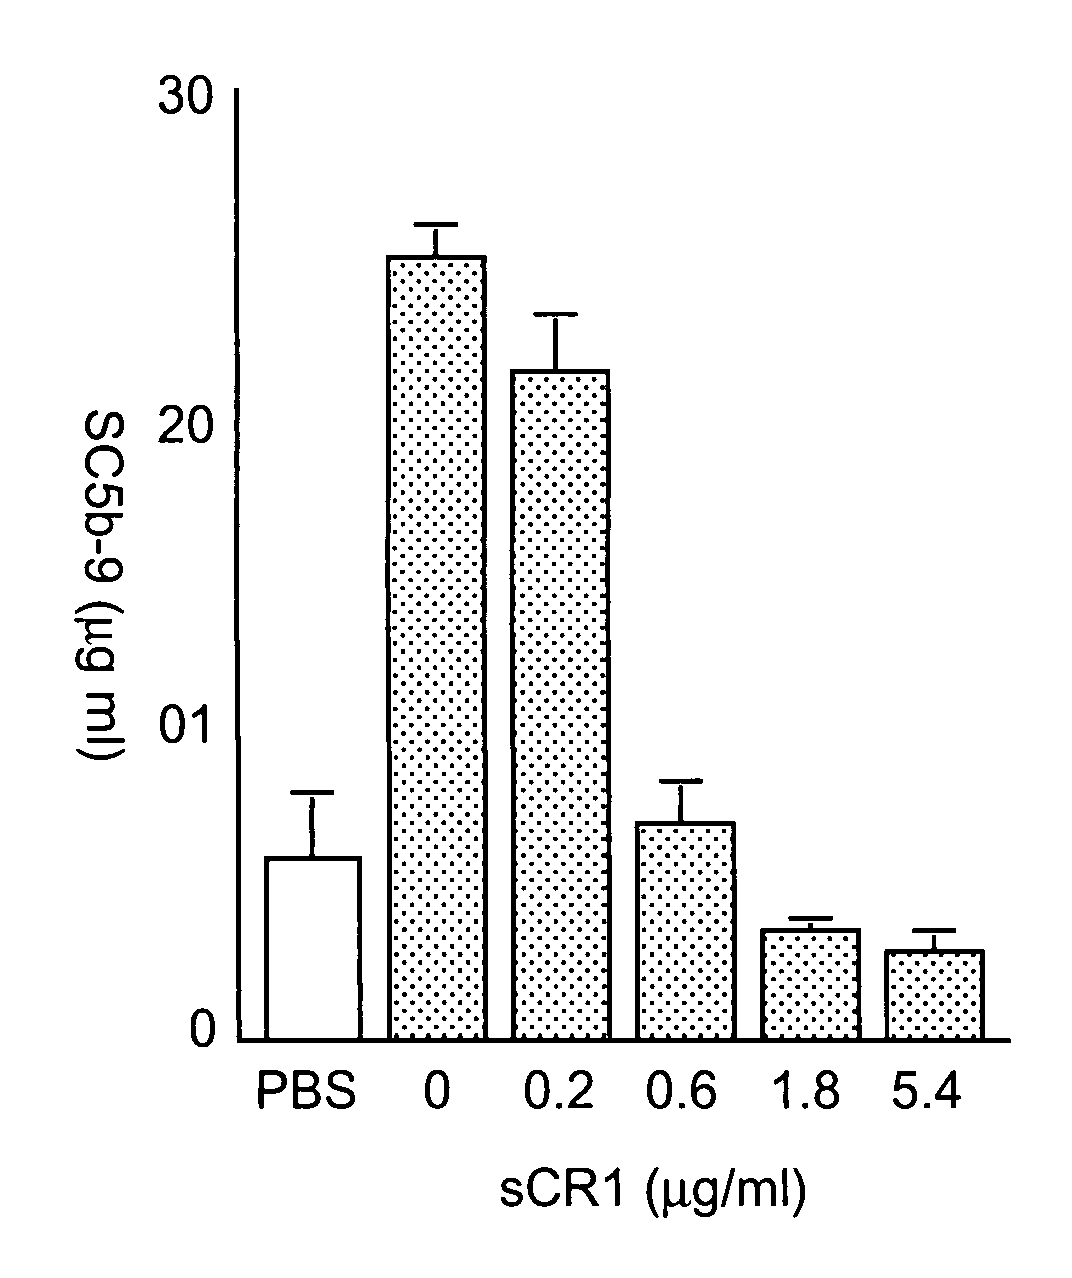 Method of inhibiting side effects of pharmaceutical compositions containing amphiphilic vehicles or drug carrier molecules